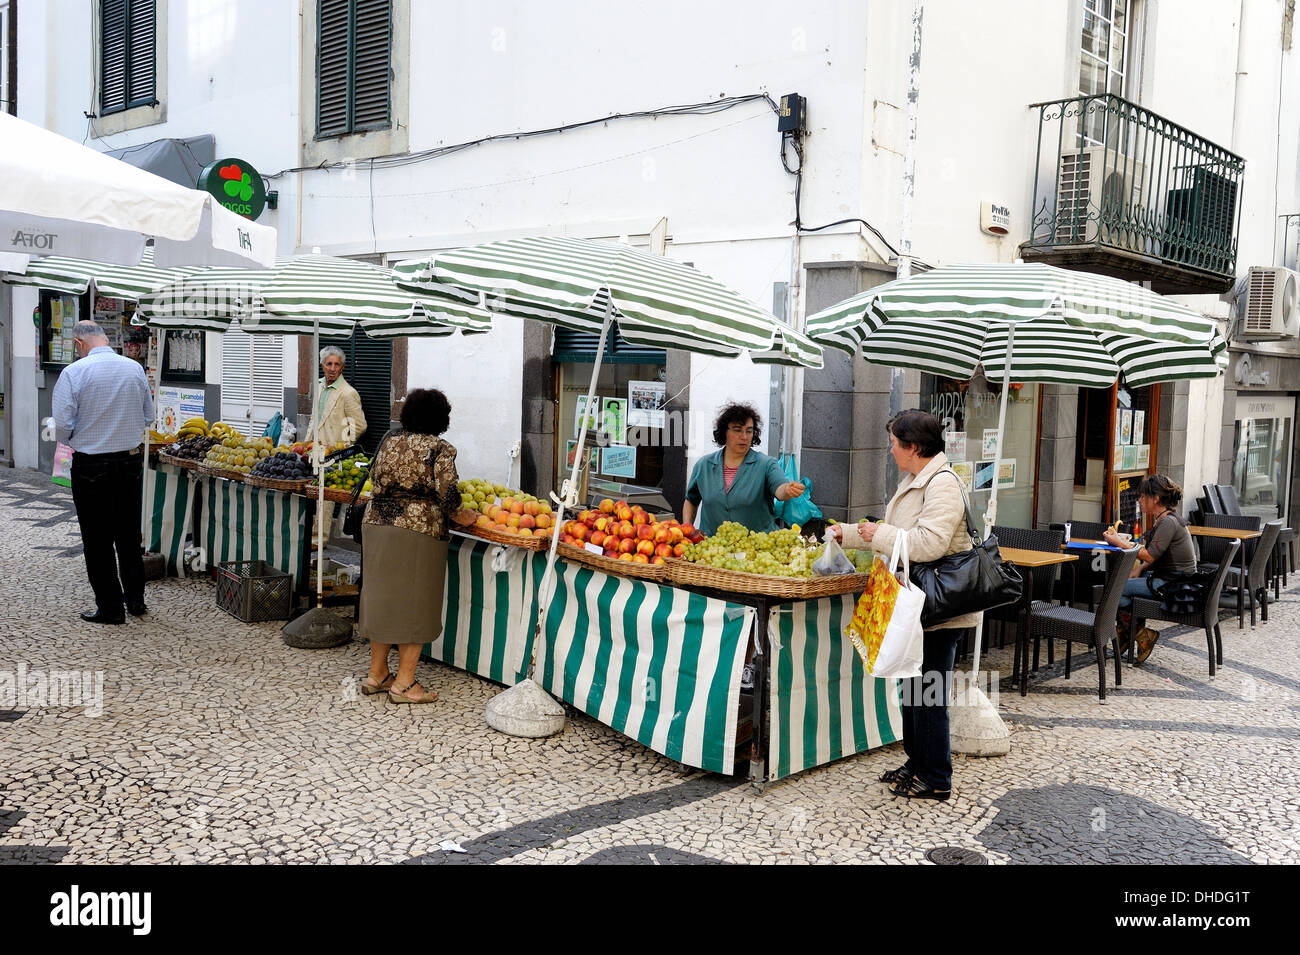 Funchal Madeira. A fruit and vegetable stall trading in the old town area. Stock Photo